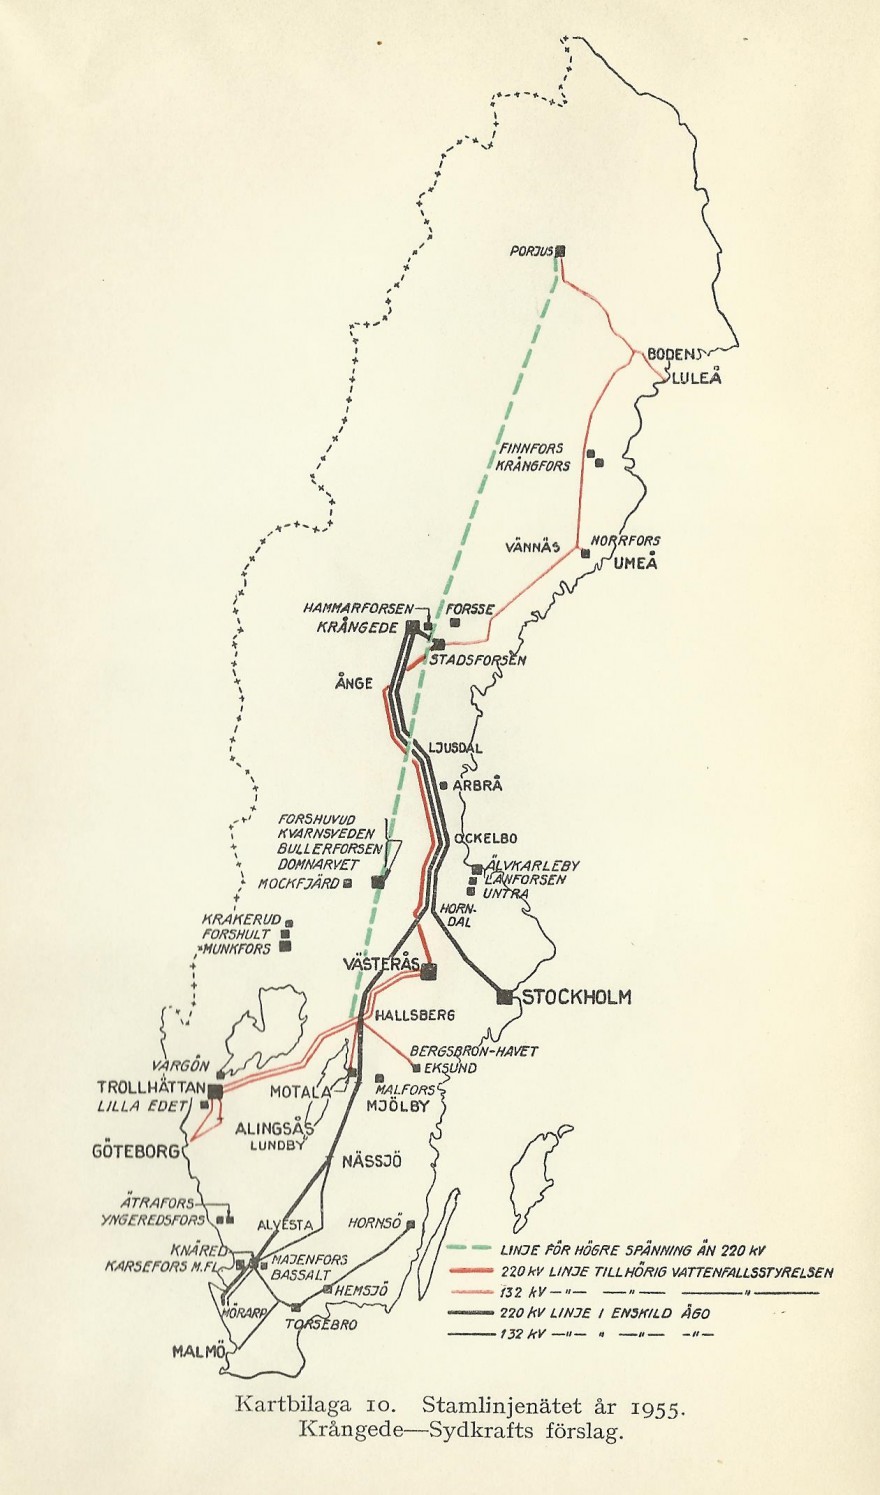 Plans in 1937 for the power grid of 1955